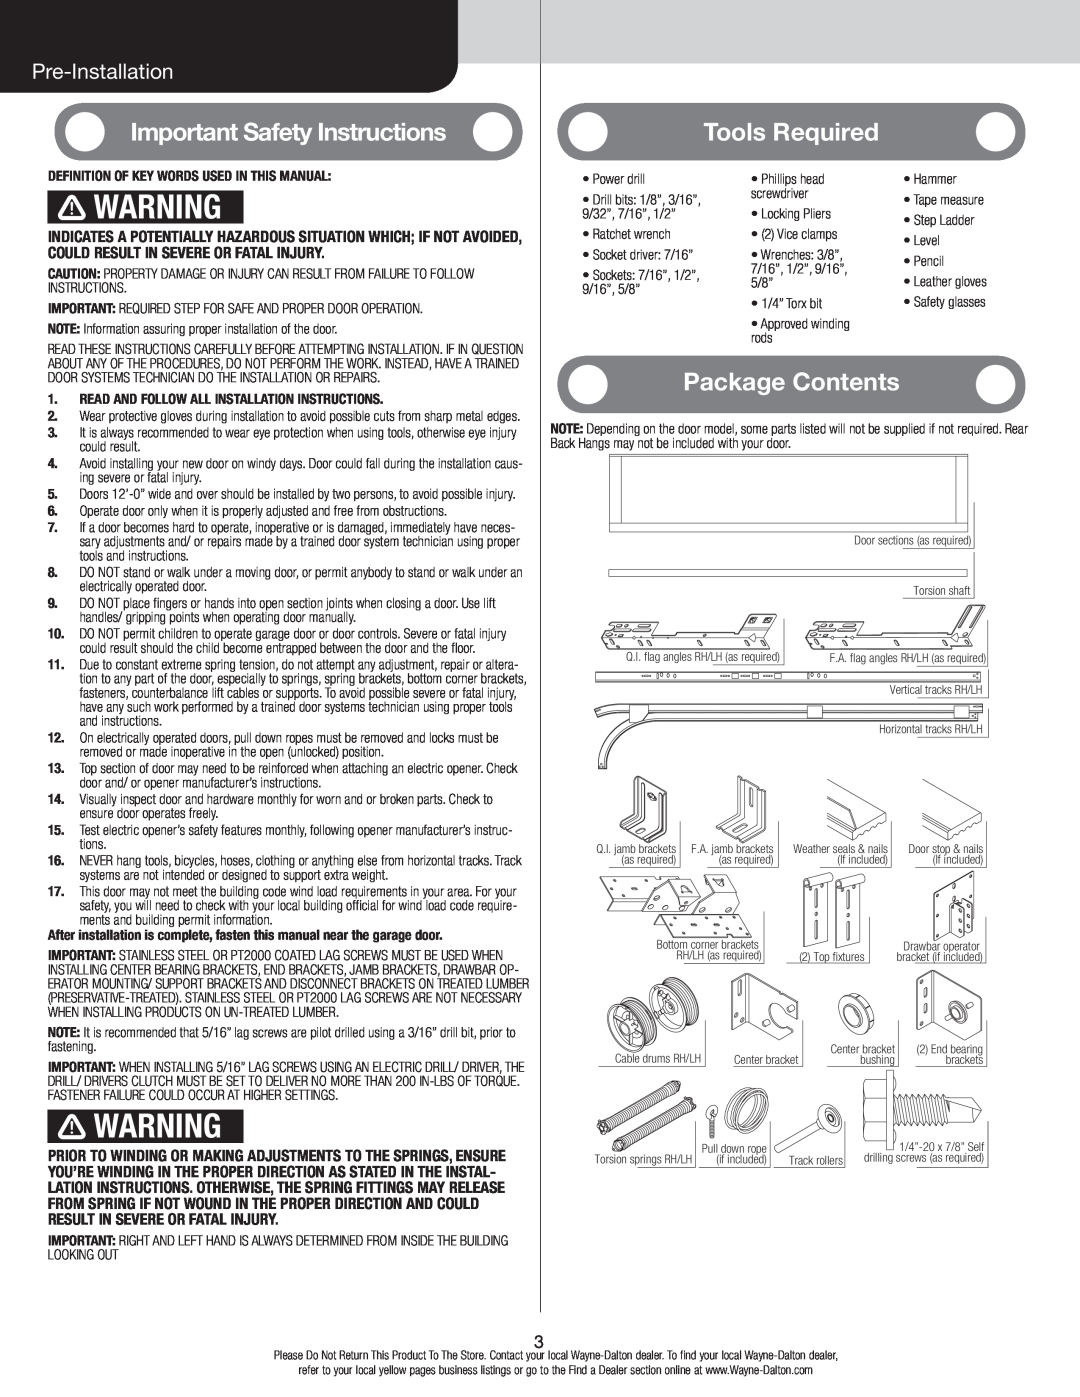 Wayne-Dalton 9800 Important Safety Instructions, Tools Required, Package Contents, Pre-Installation 